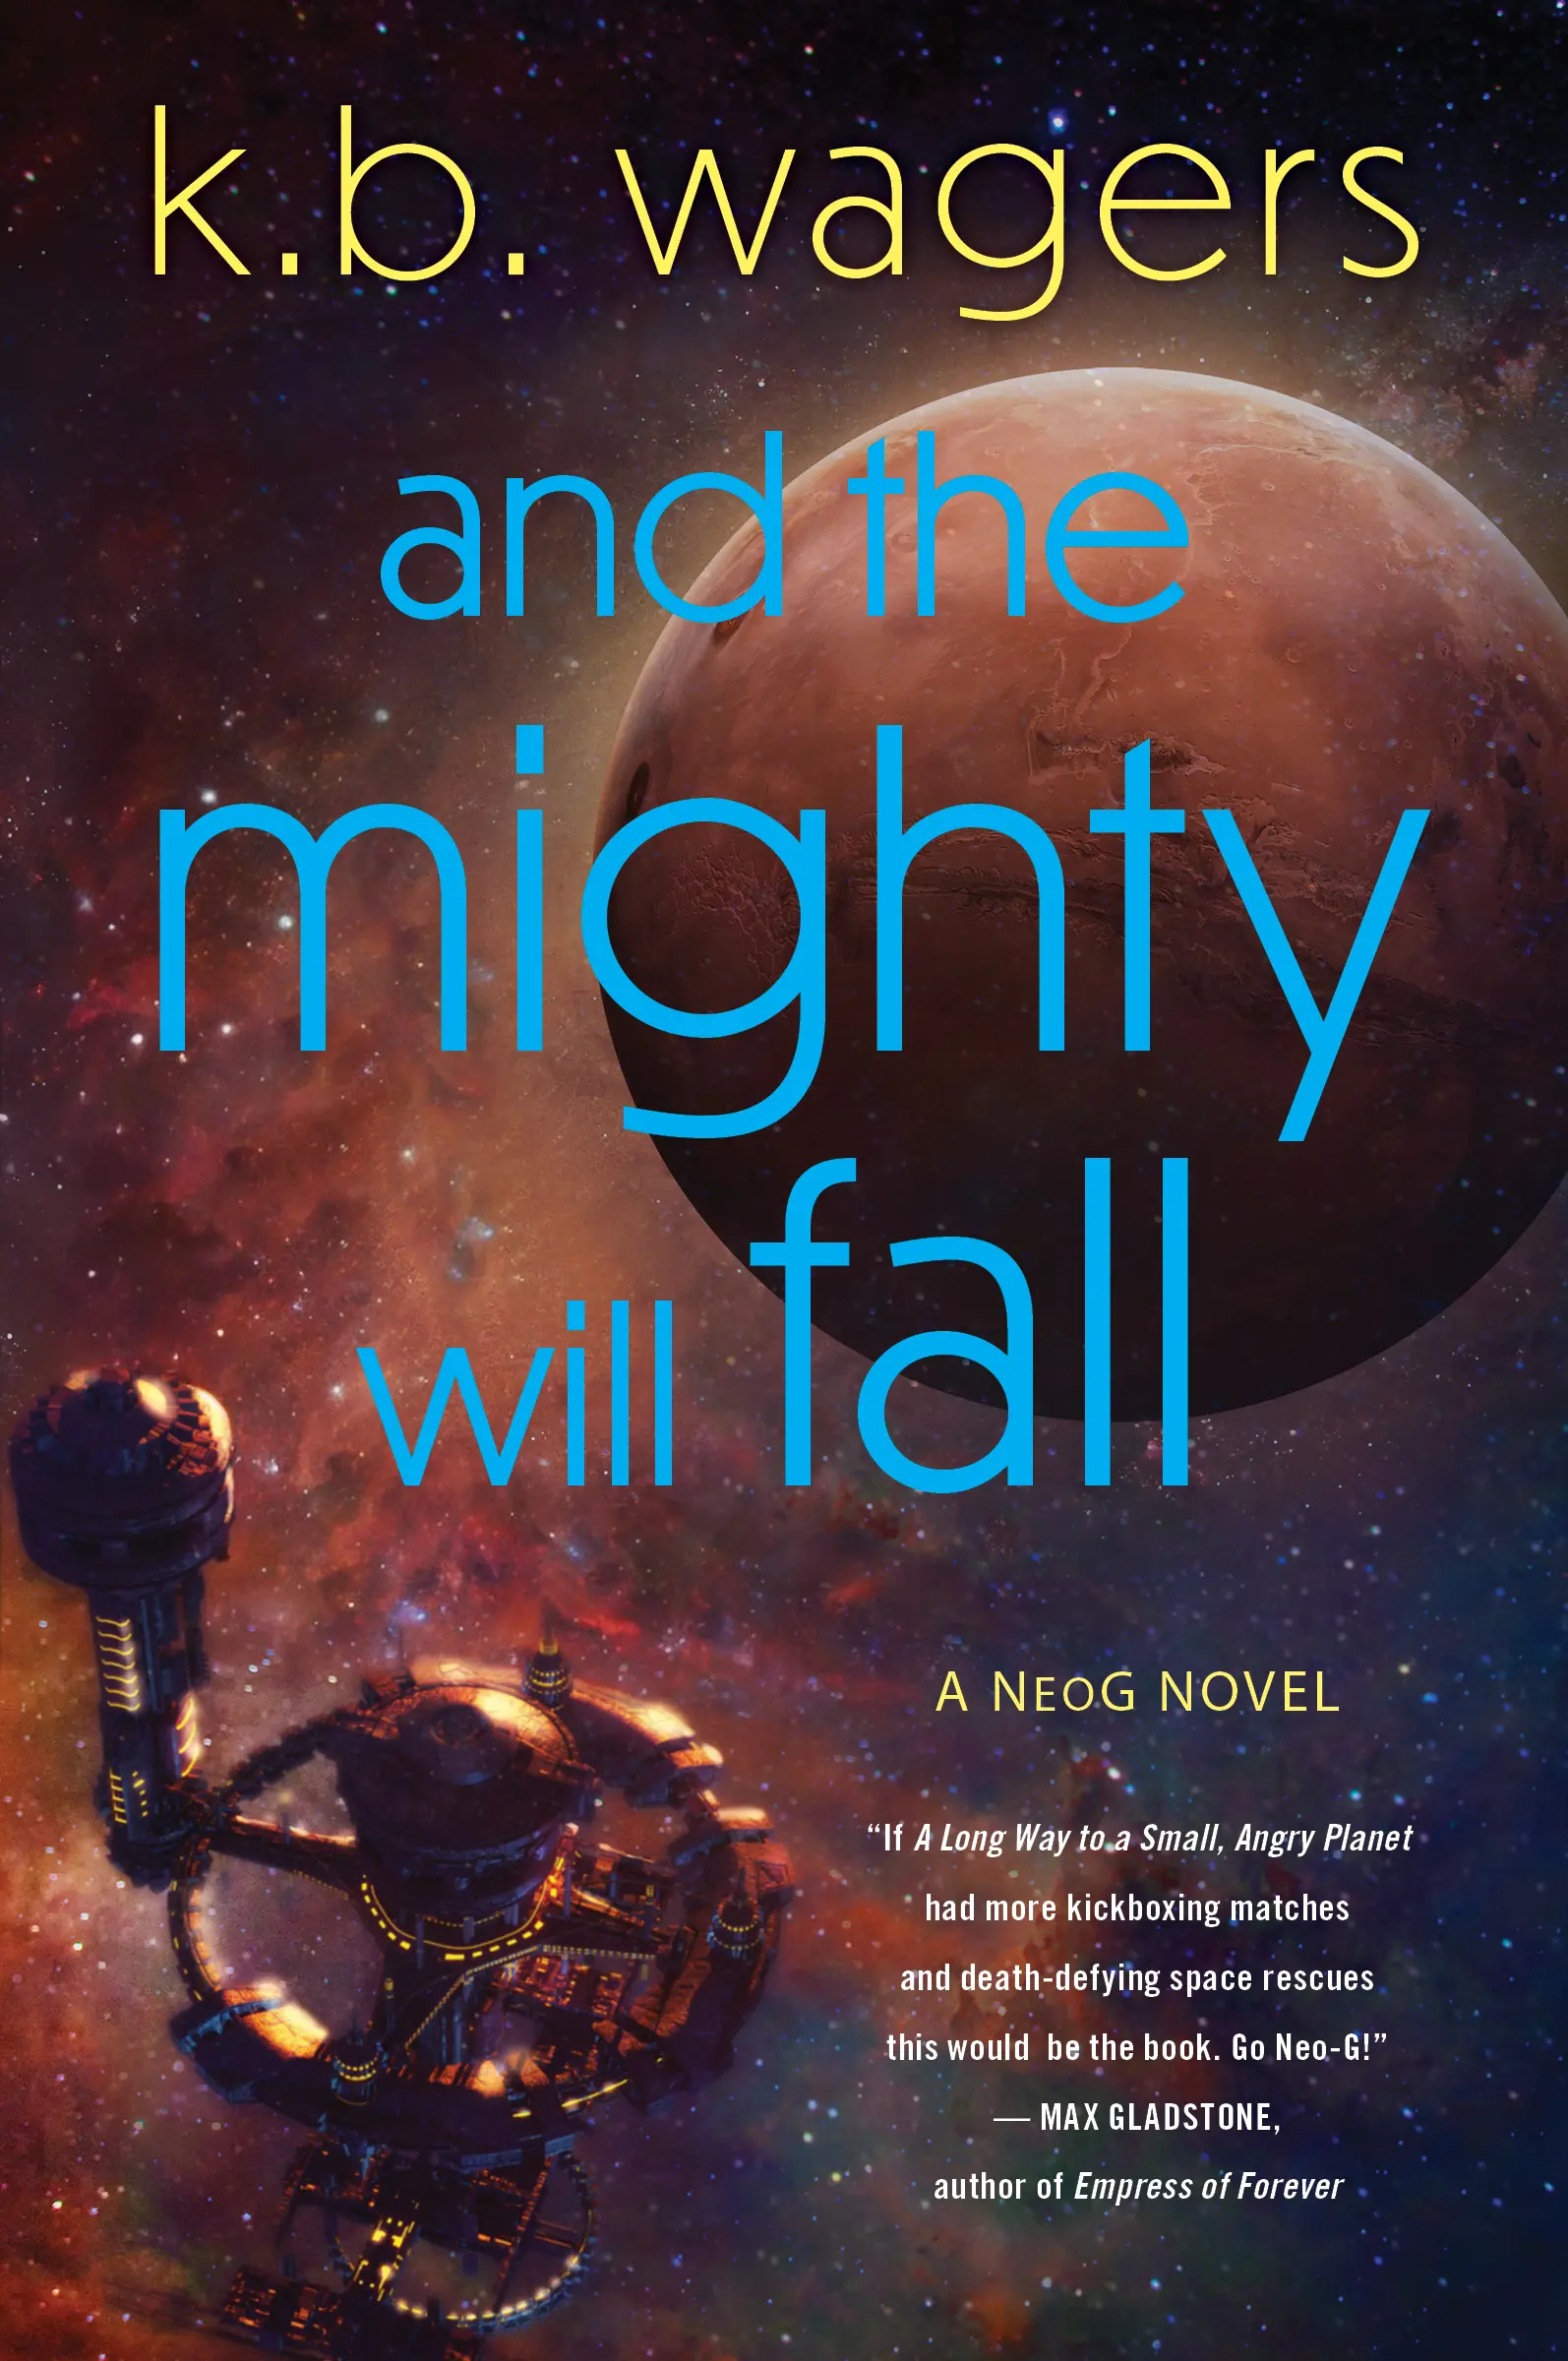 And the mighty will fall, a k.b. wagners novel book cover with a space station orbiting a moon